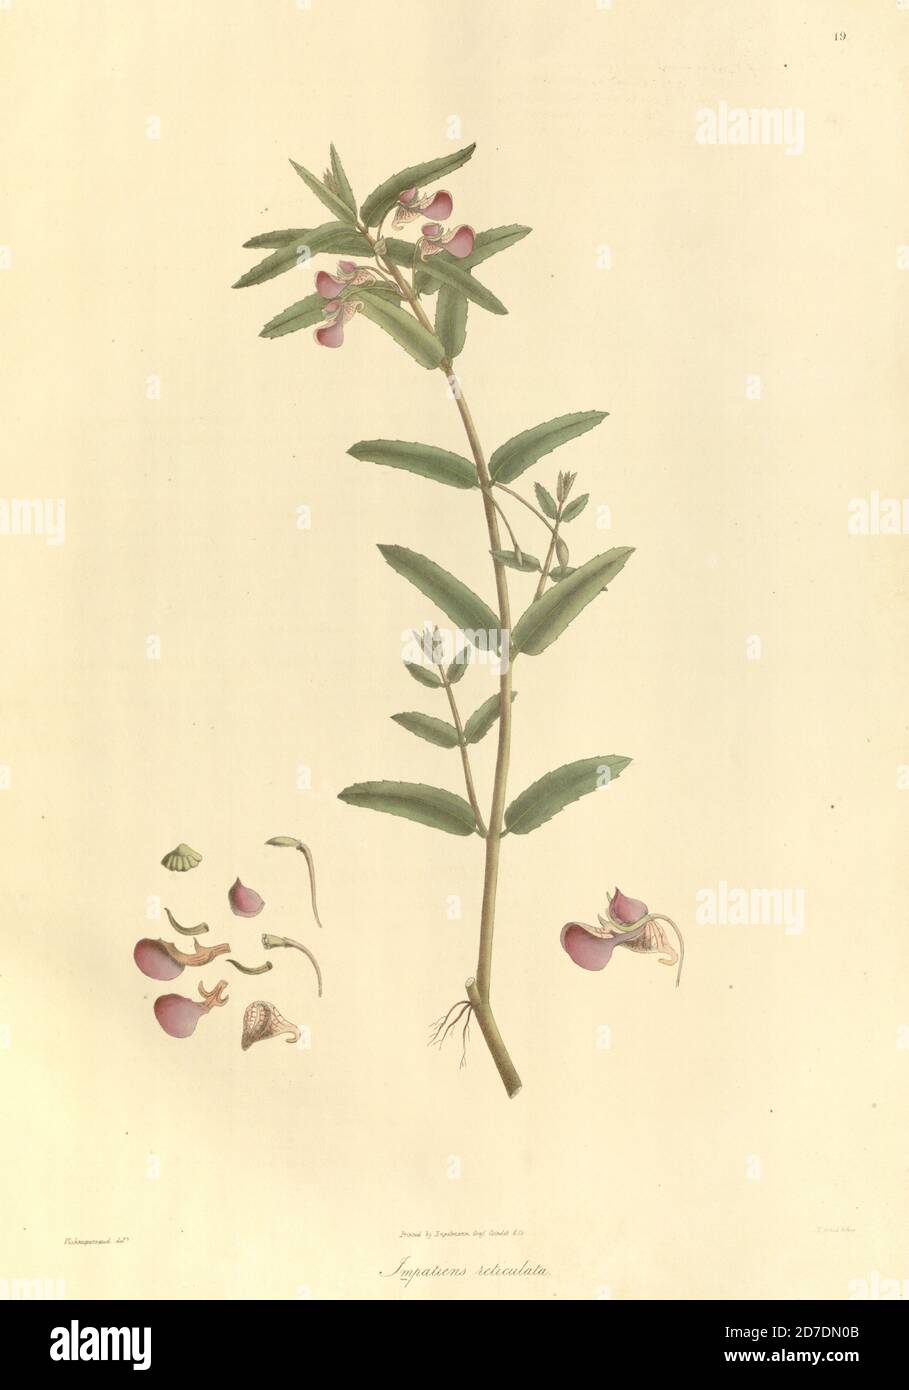 Impatiens reticulata From Plantae Asiaticae rariores, or, Descriptions and figures of a select number of unpublished East Indian plants Volume 1 by N. Wallich. Nathaniel Wolff Wallich FRS FRSE (28 January 1786 – 28 April 1854) was a surgeon and botanist of Danish origin who worked in India, initially in the Danish settlement near Calcutta and later for the Danish East India Company and the British East India Company. He was involved in the early development of the Calcutta Botanical Garden, describing many new plant species and developing a large herbarium collection which was distributed to c Stock Photo